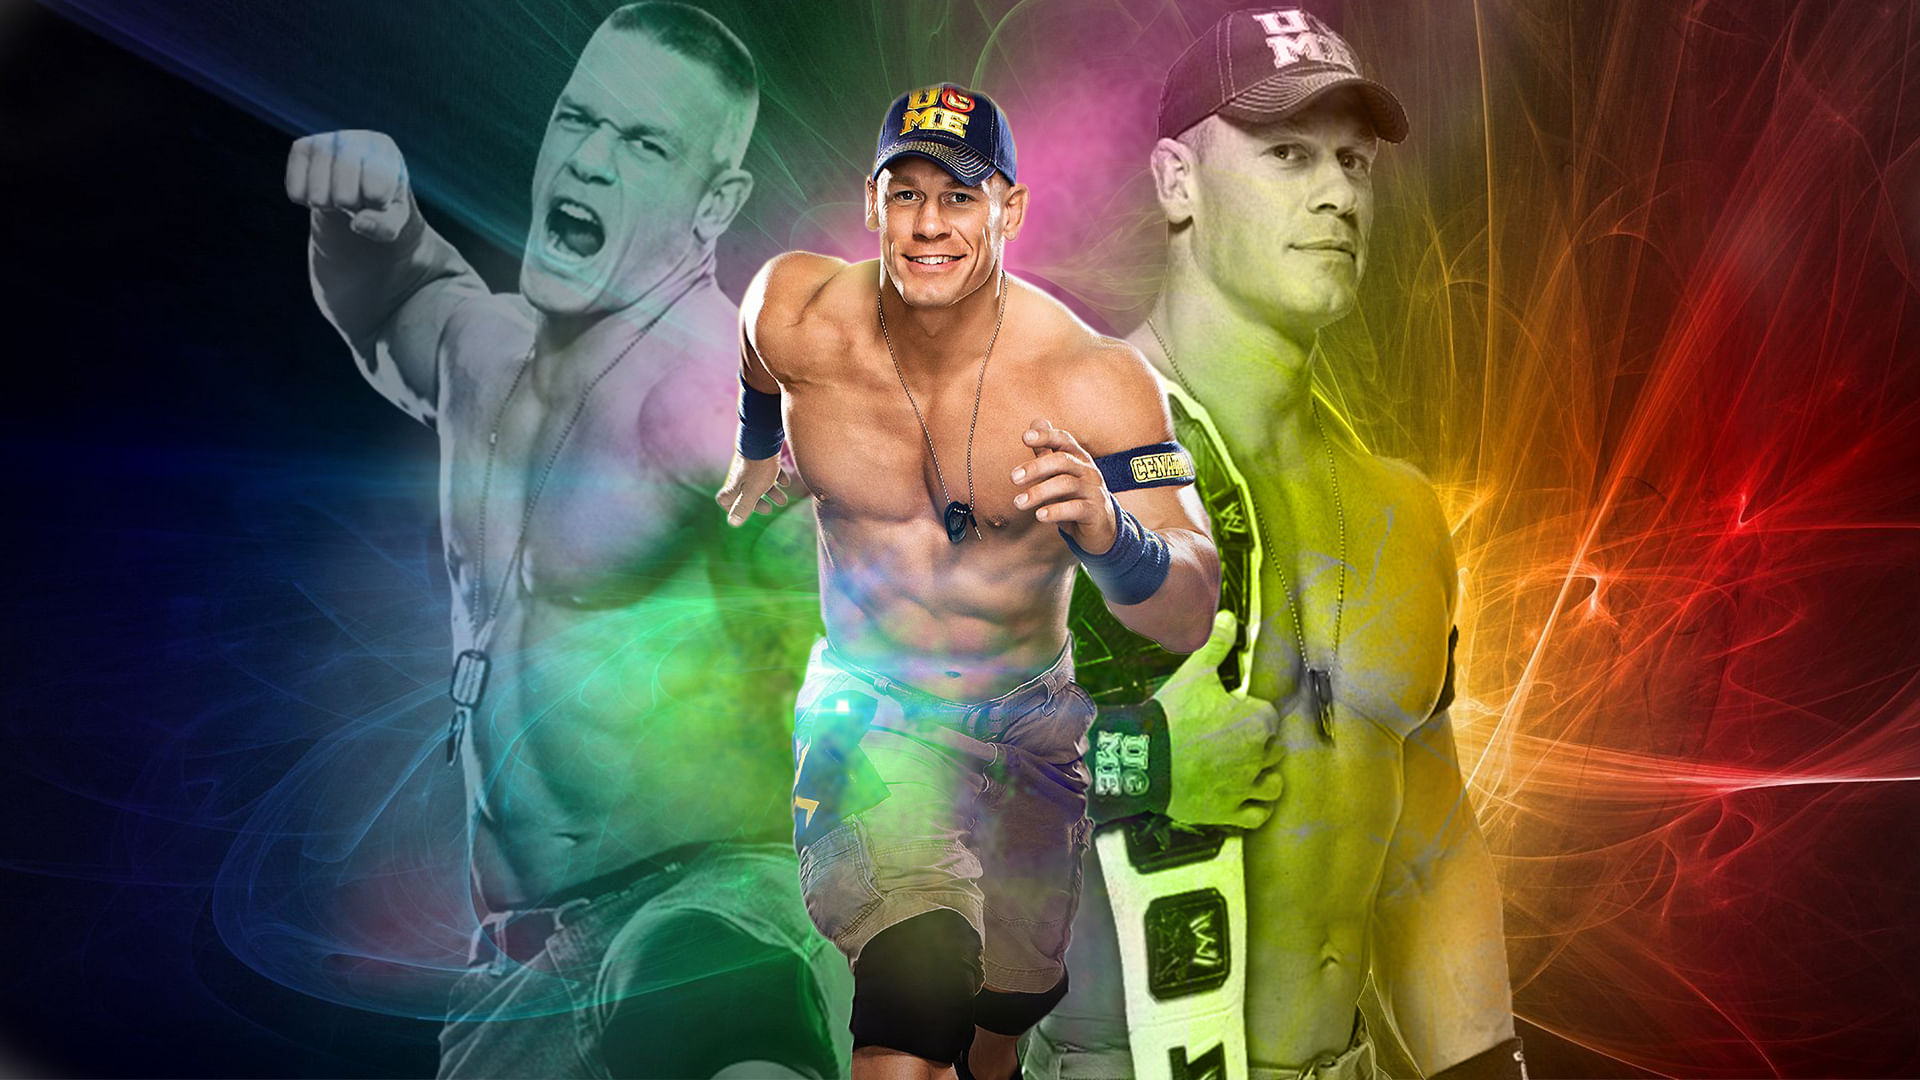 Search free john cena wallpapers on zedge and personalize your phone to sui...